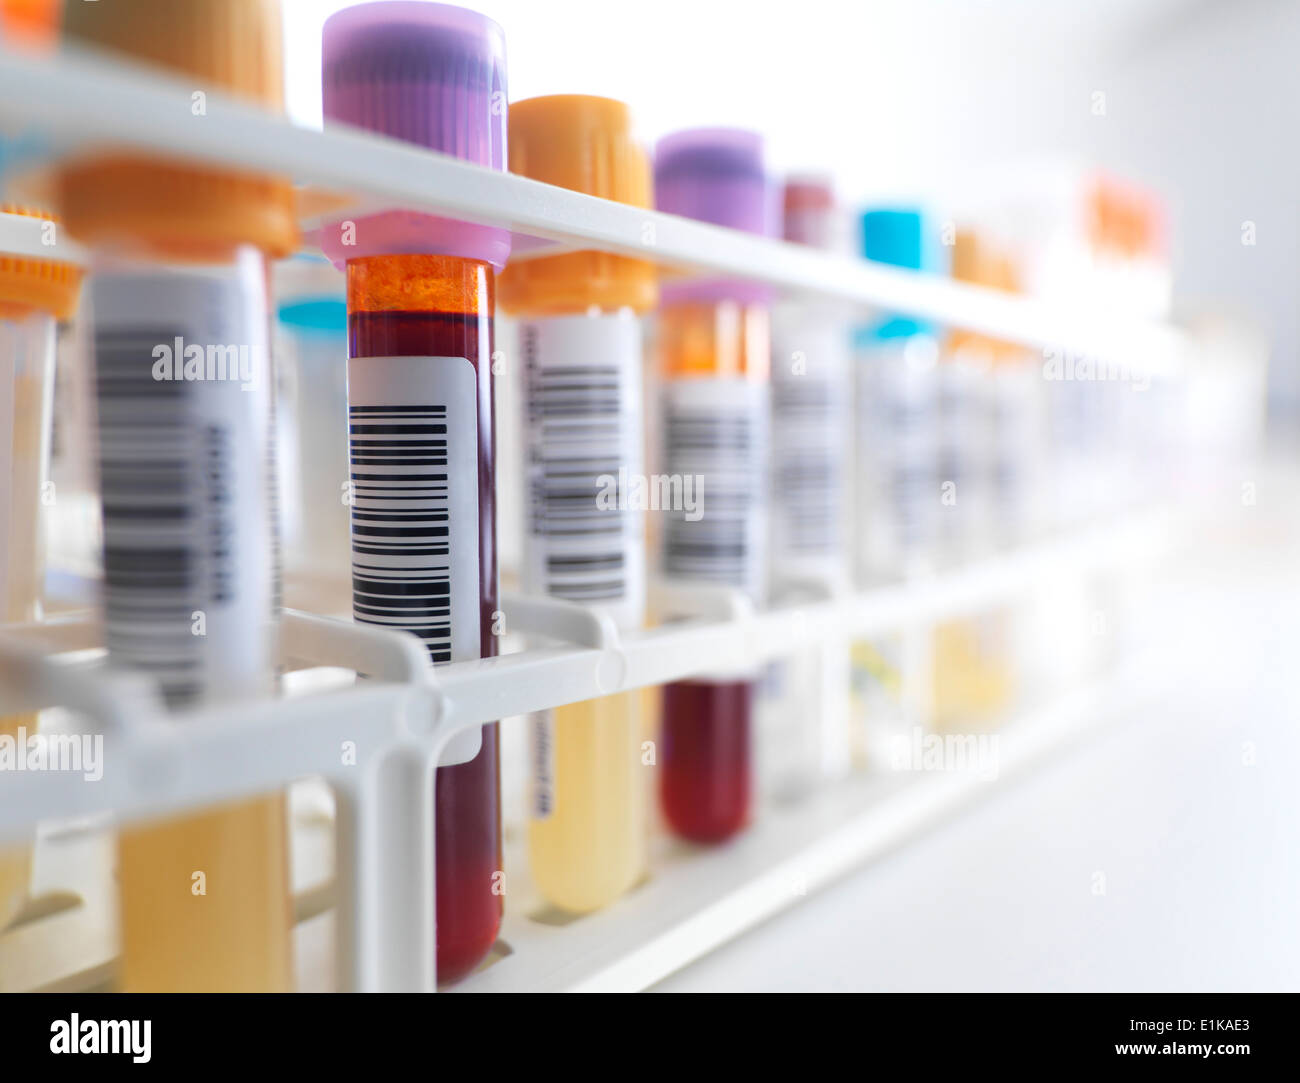 Blood samples in a test tube rack. Stock Photo